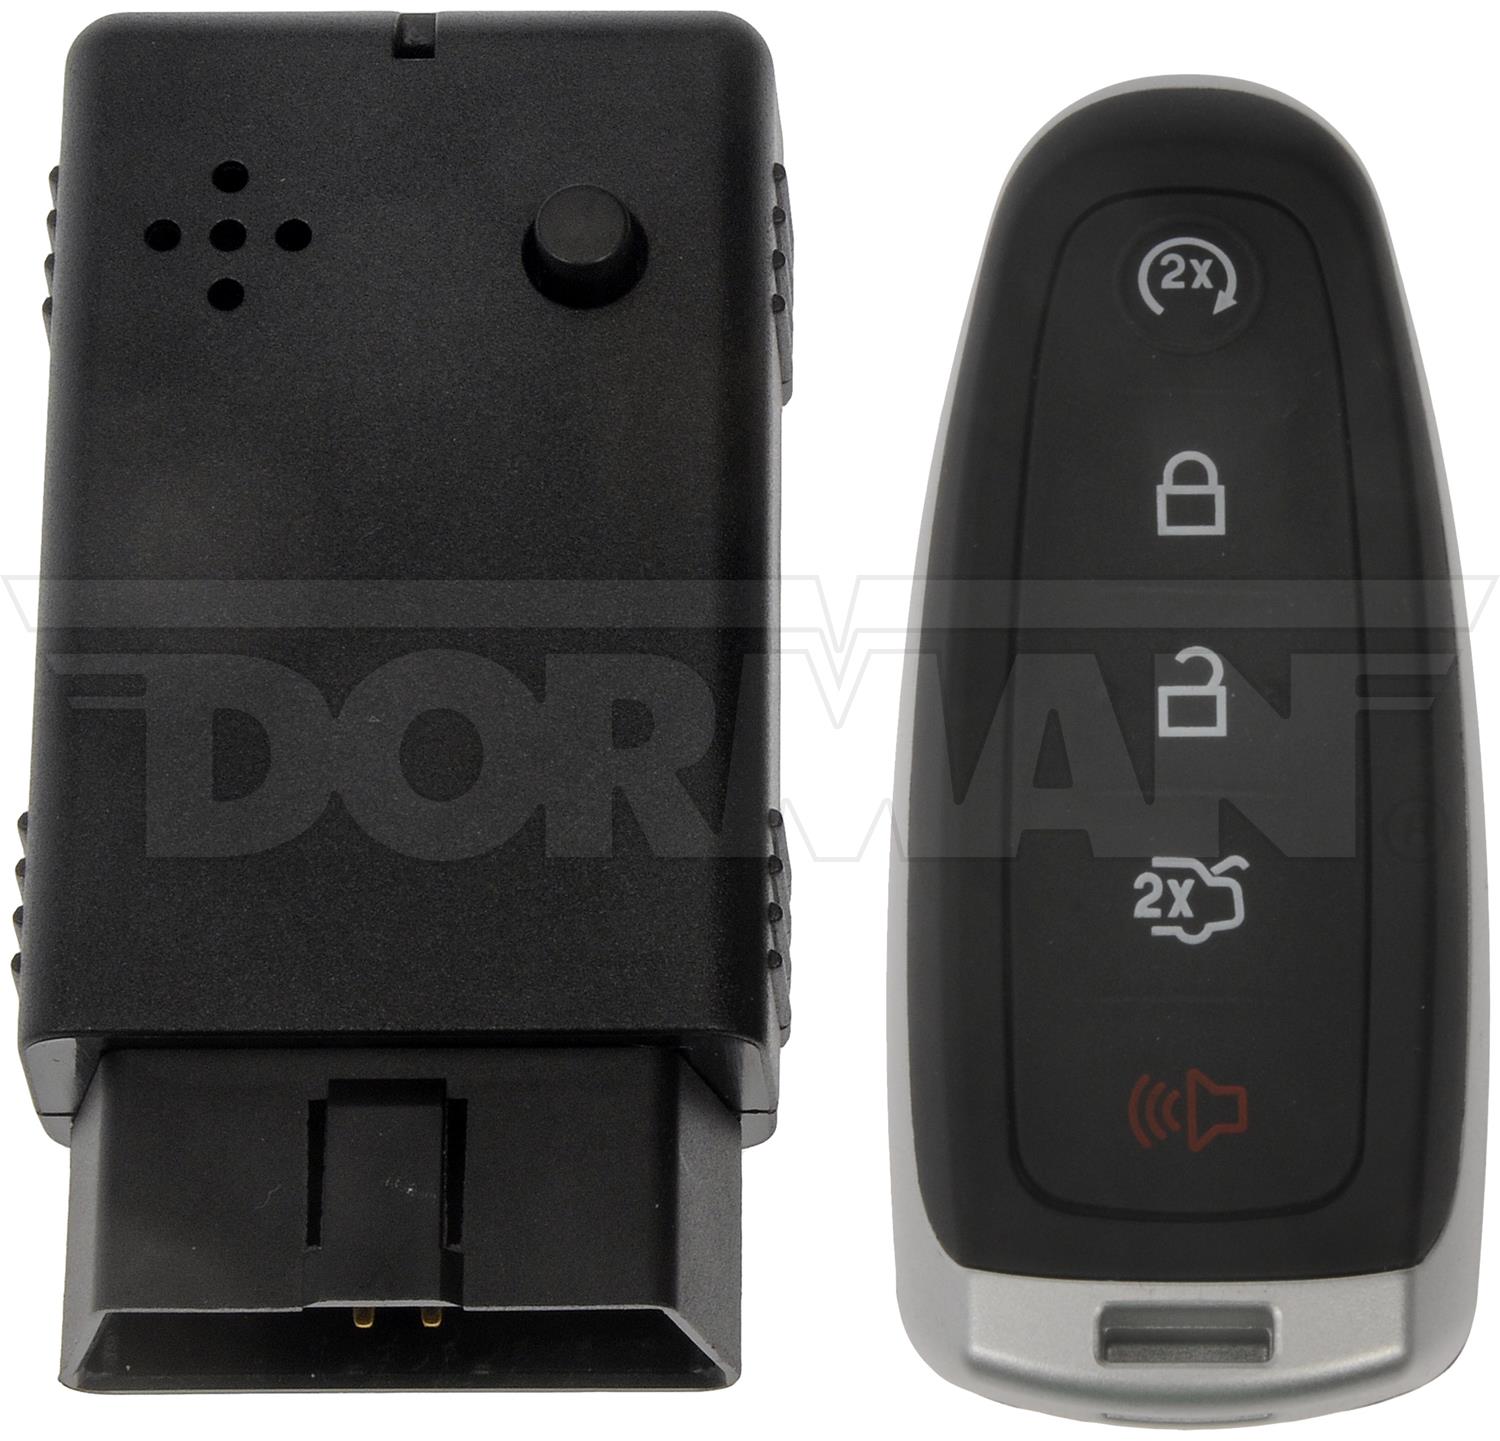 99377 Keyless Entry Remote for Select 2011-2019 Ford Edge, Expedition, Explorer, Flex, Focus, Taurus